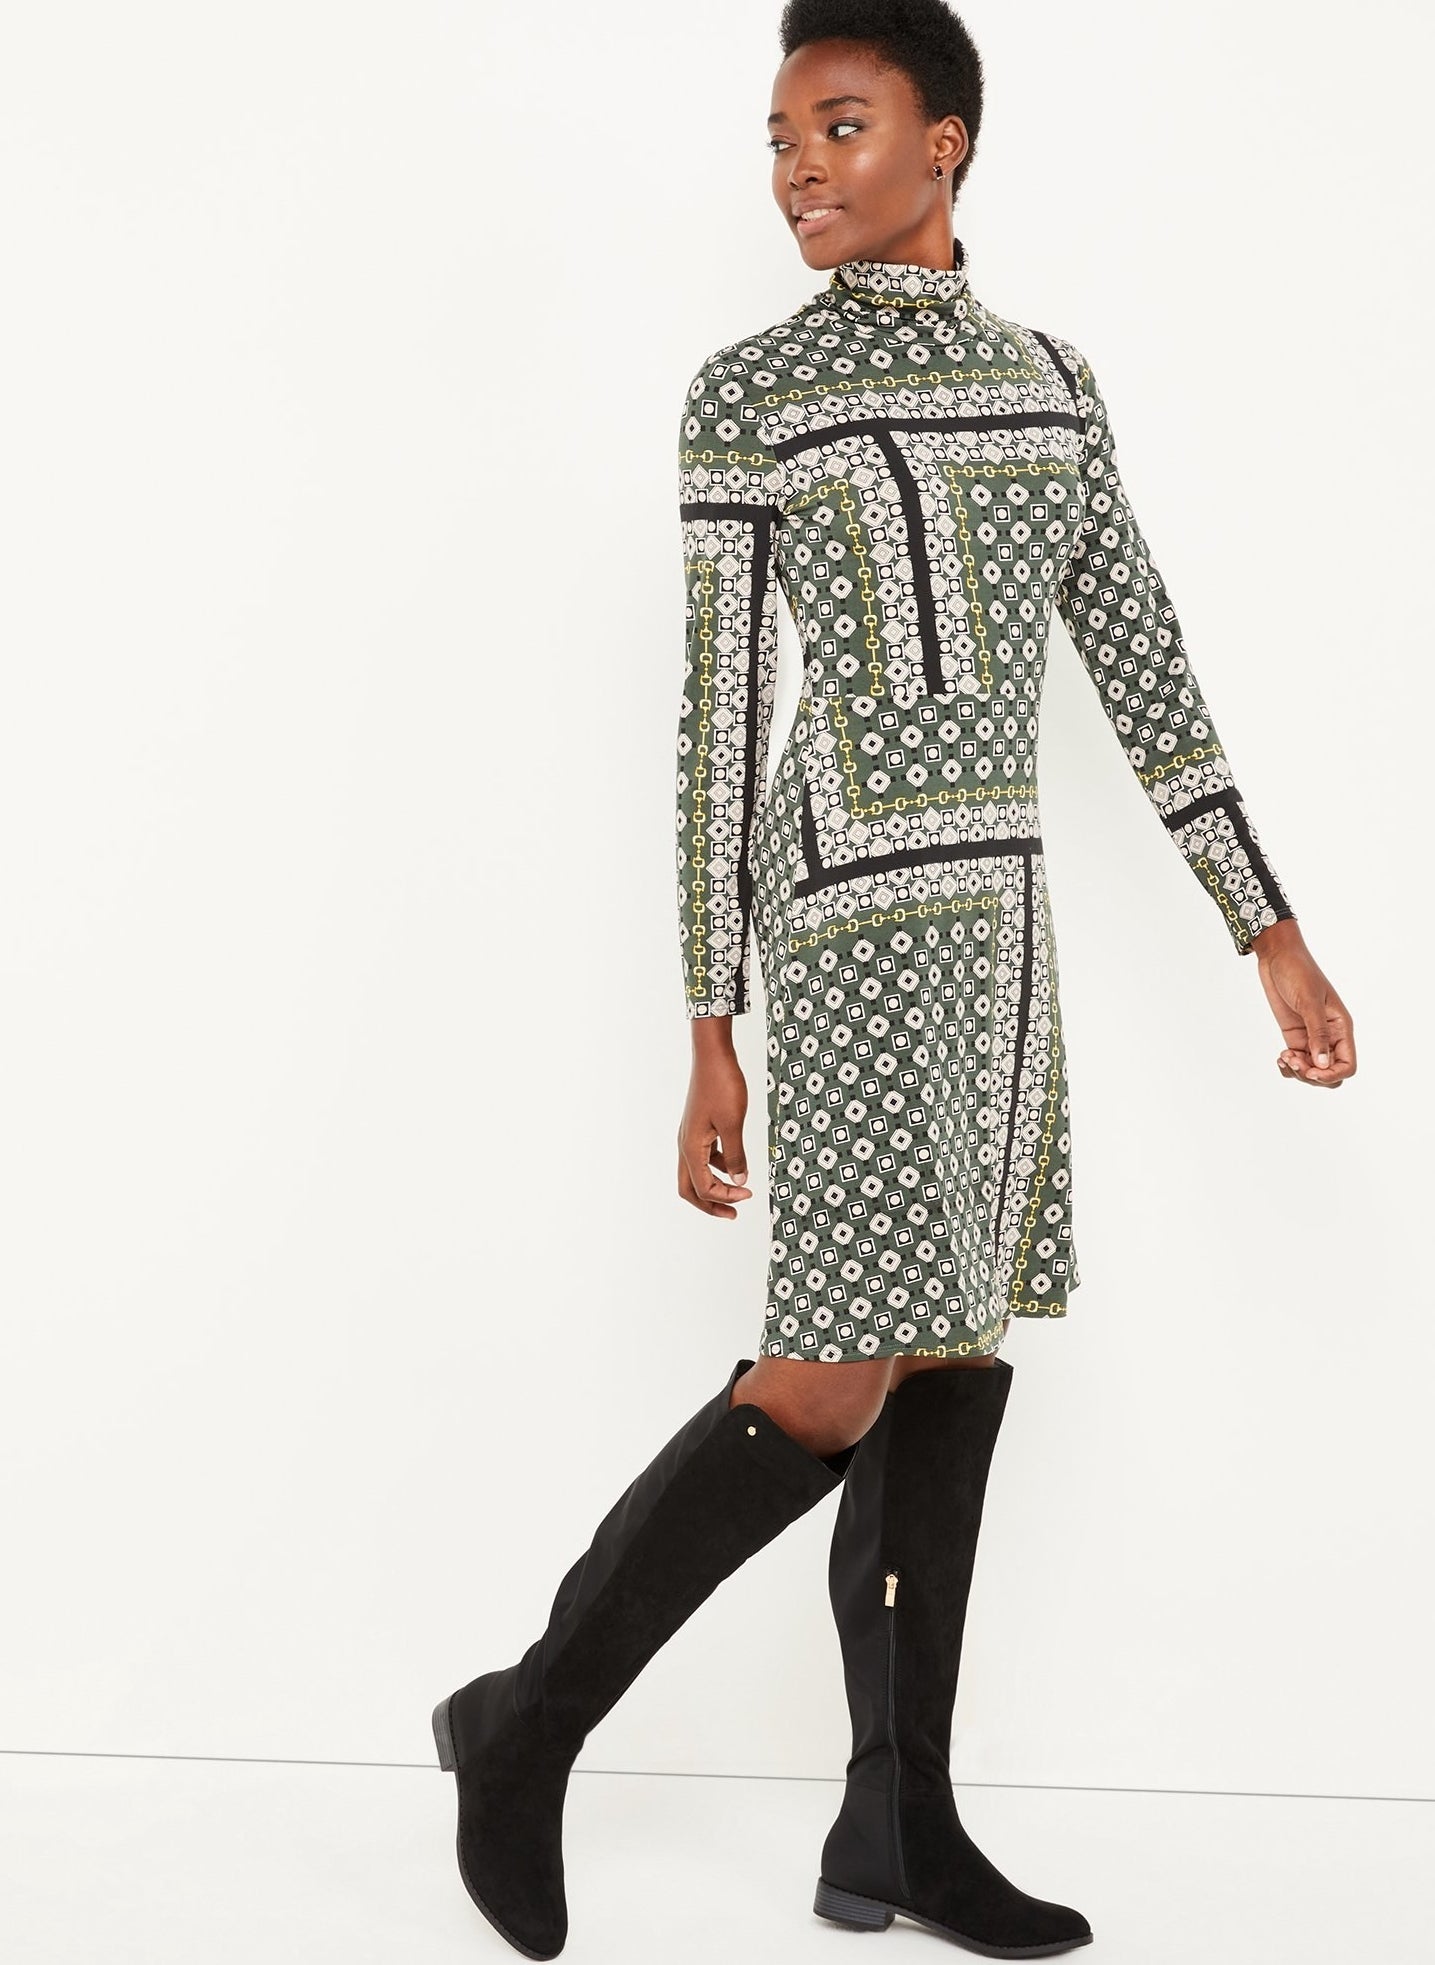 The long sleeve dress paired with knee-high black boots